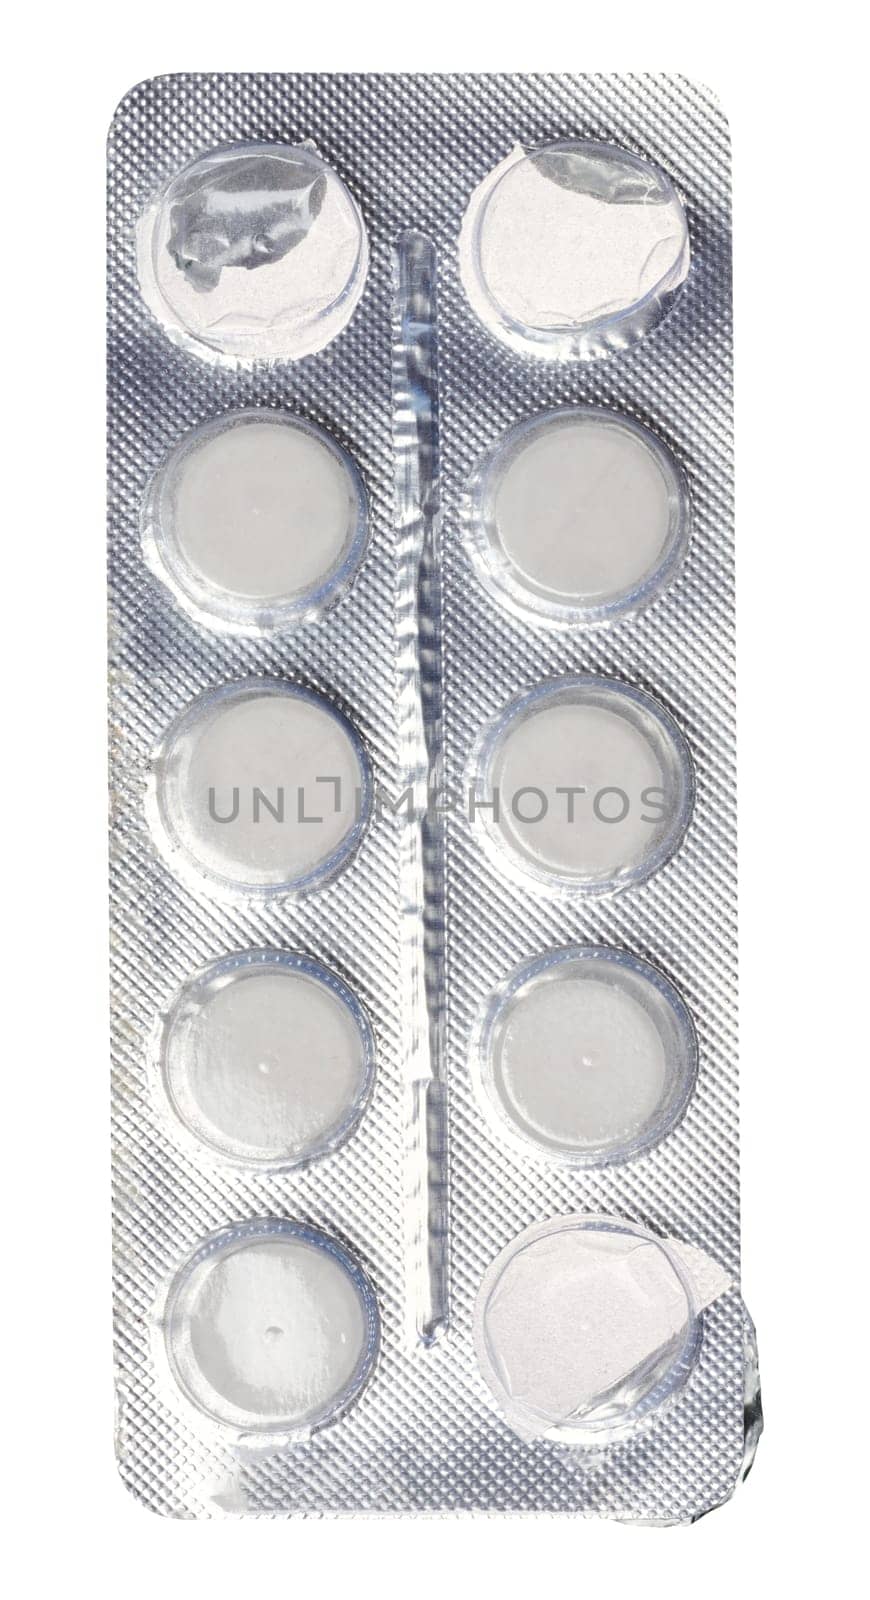 Round white tablets in blister pack, top view by ndanko